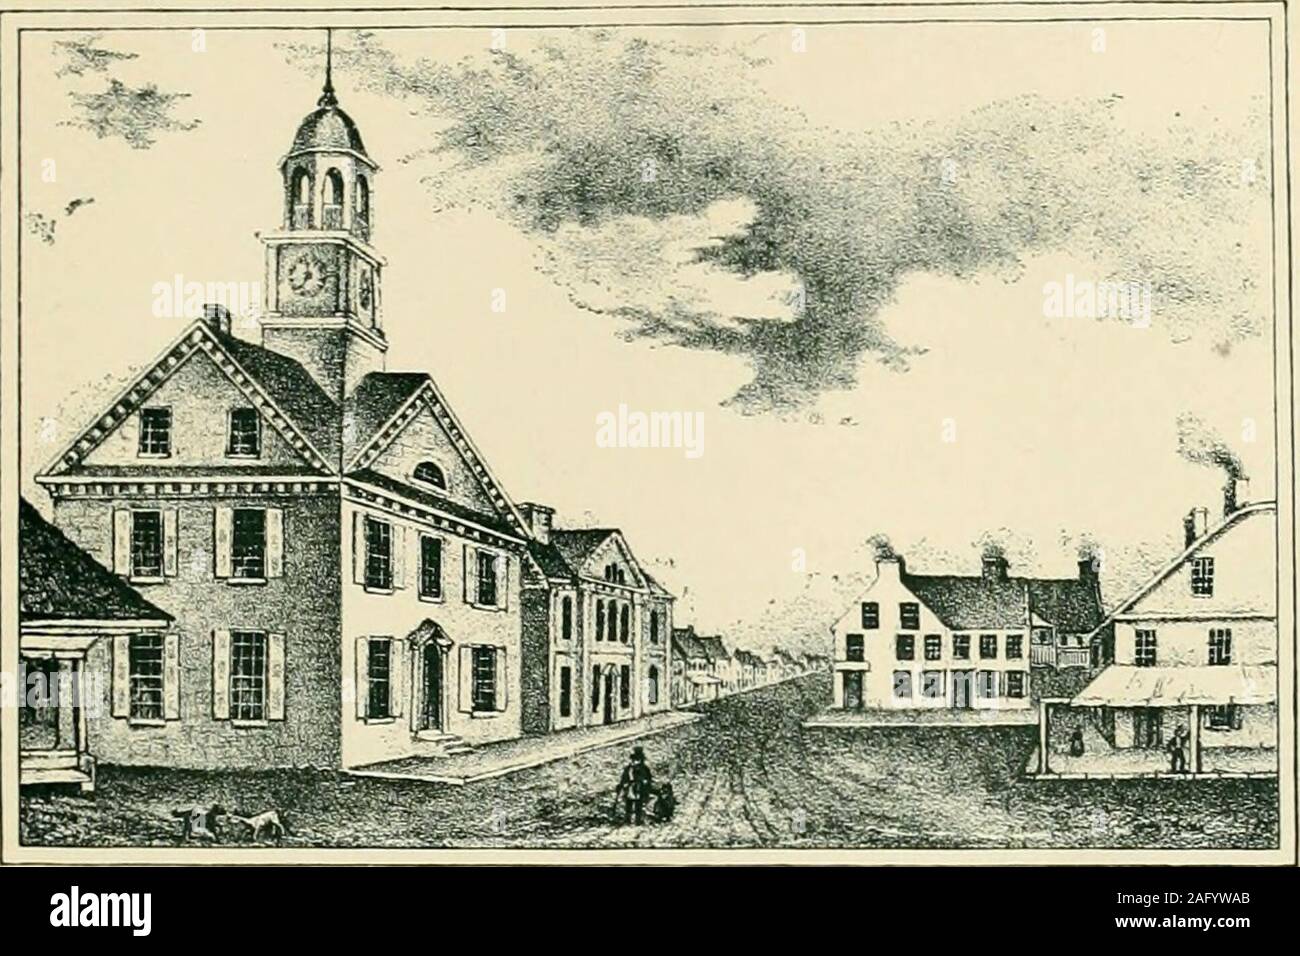 . The annals of the families of Caspar, Henry, Baltzer and George Spengler, who settled in York County, respectively, in 1729, 1732, 1732, and 1751 : with biographical and historical sketches, and memorabilia of contemporaneous local events. (generally called Jail Street because the countyjail was on it) was Jacob Upps tavern, before and after 1800;in 1816, Drift and Gardners store, Michael Gardners store, 1818,followed by Gallagher and Werts. Next south, 1812, was ConradLaubs Green Tree Inn, 60 feet front, succeeded, 1816, by FrancisJones store, 1817, by Robert Hamersleys Inn, (sign of James Stock Photo